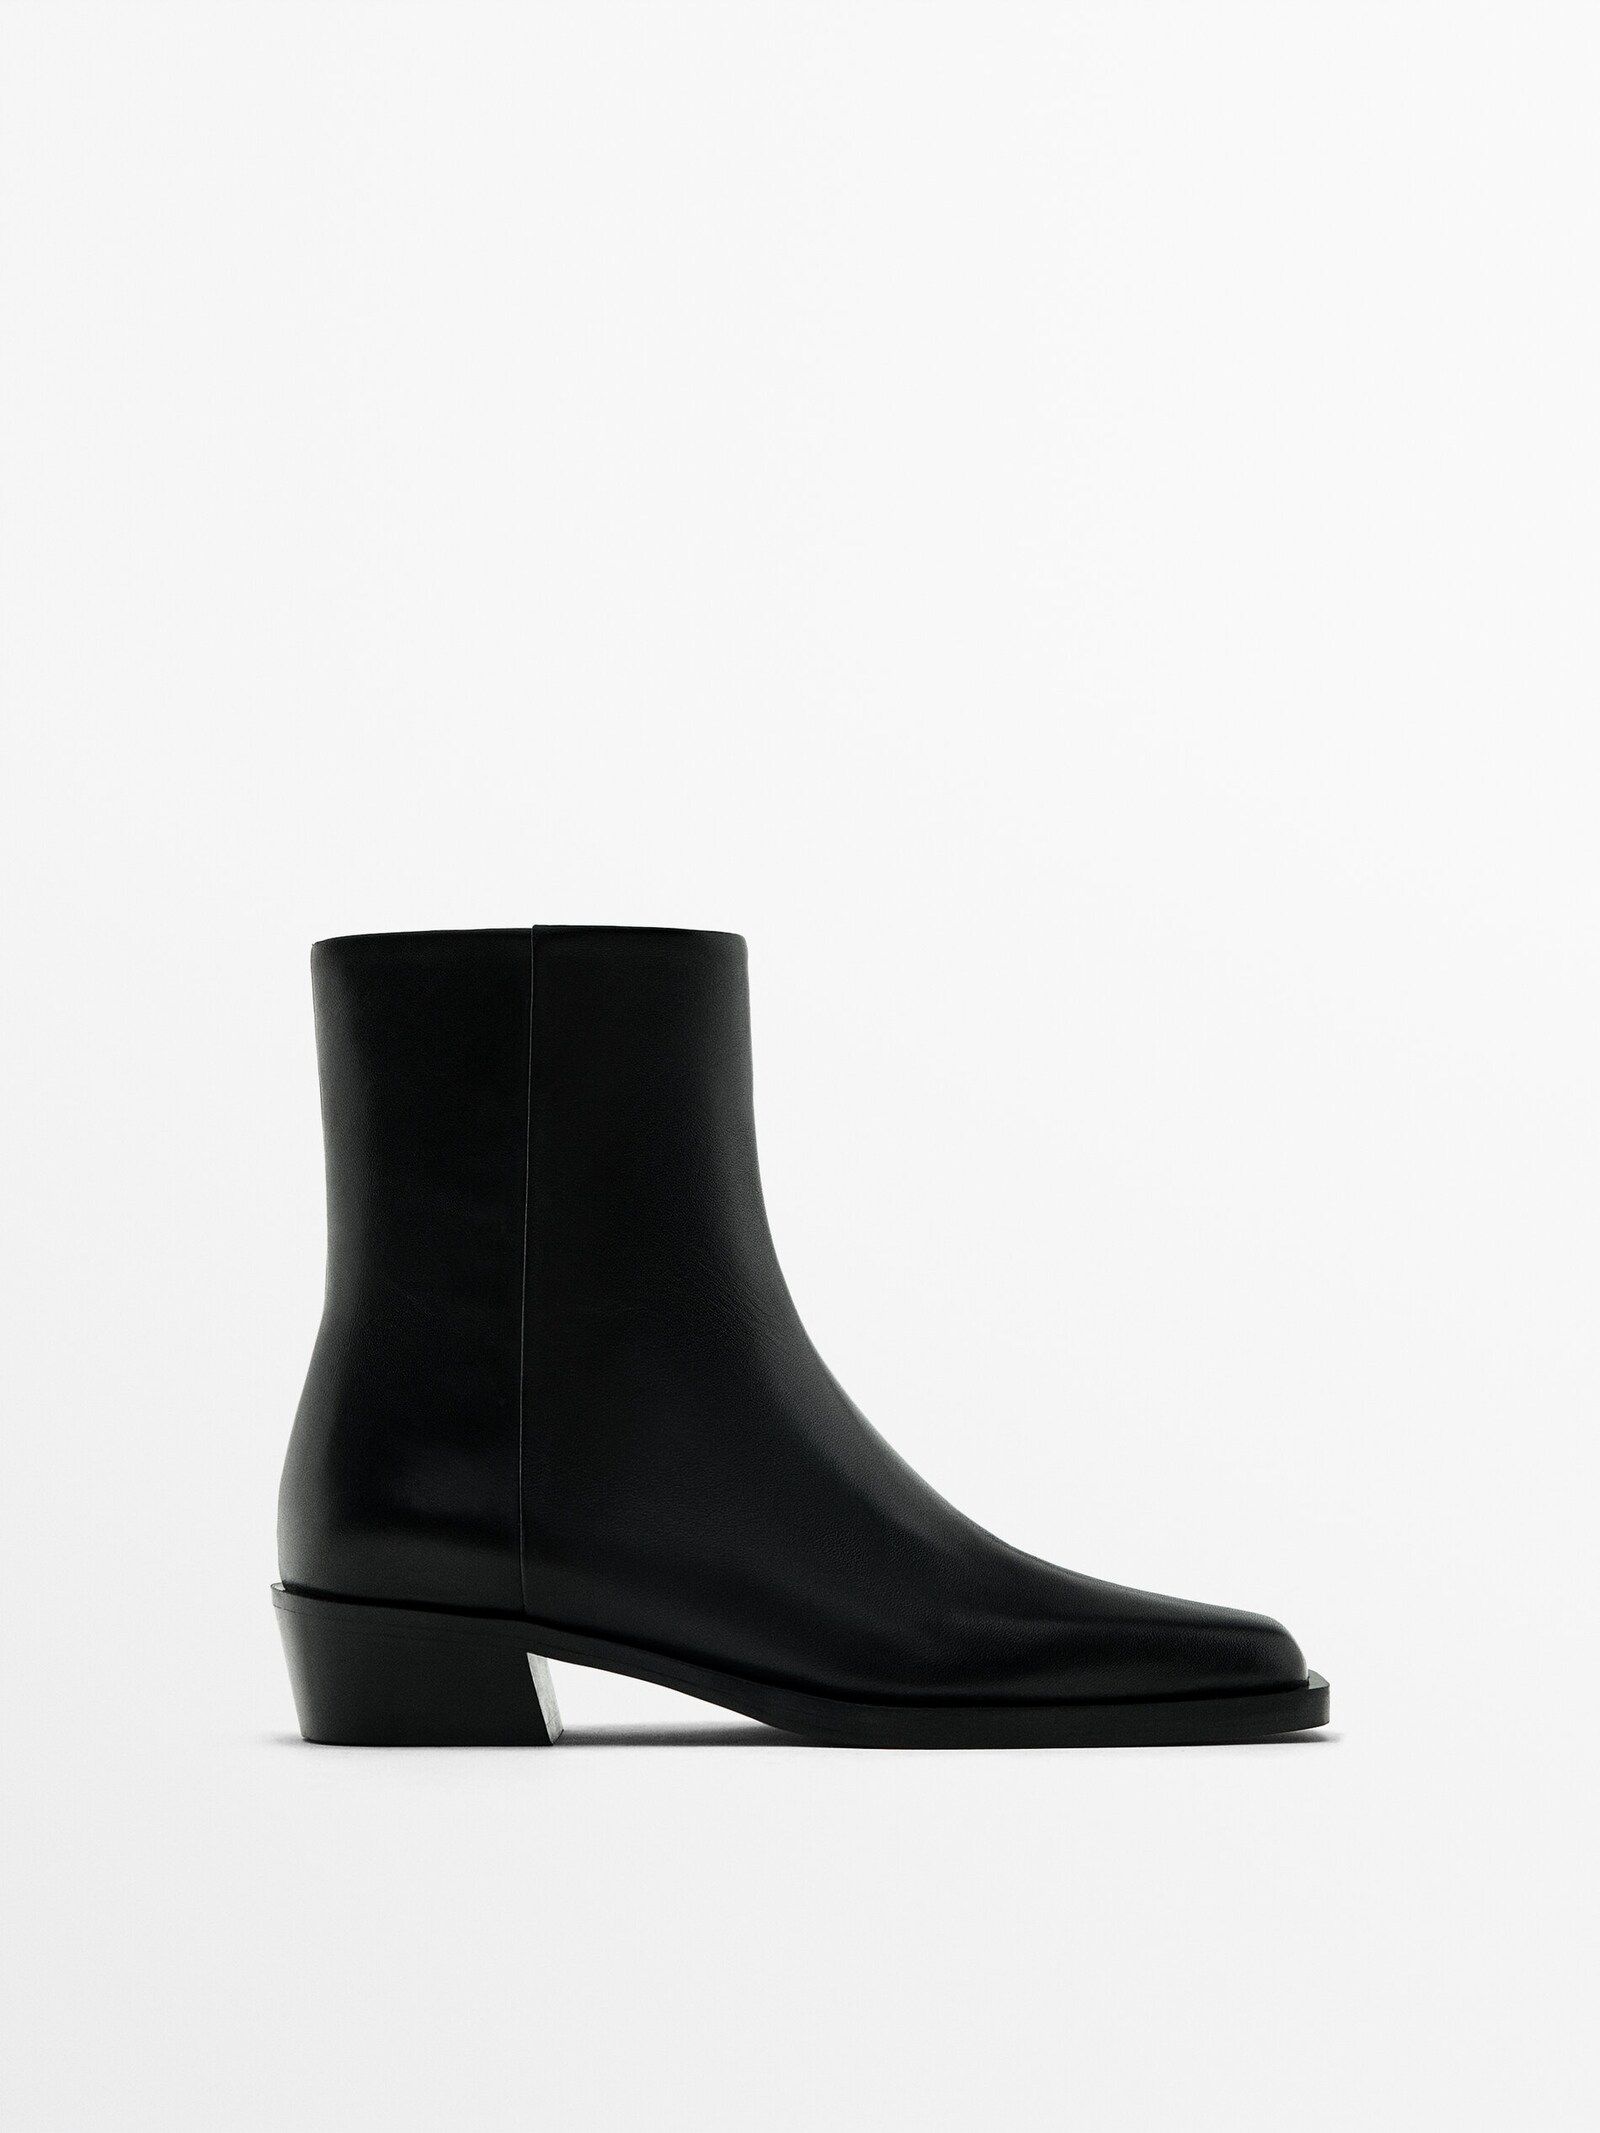 Ankle boots with square toe | Massimo Dutti UK